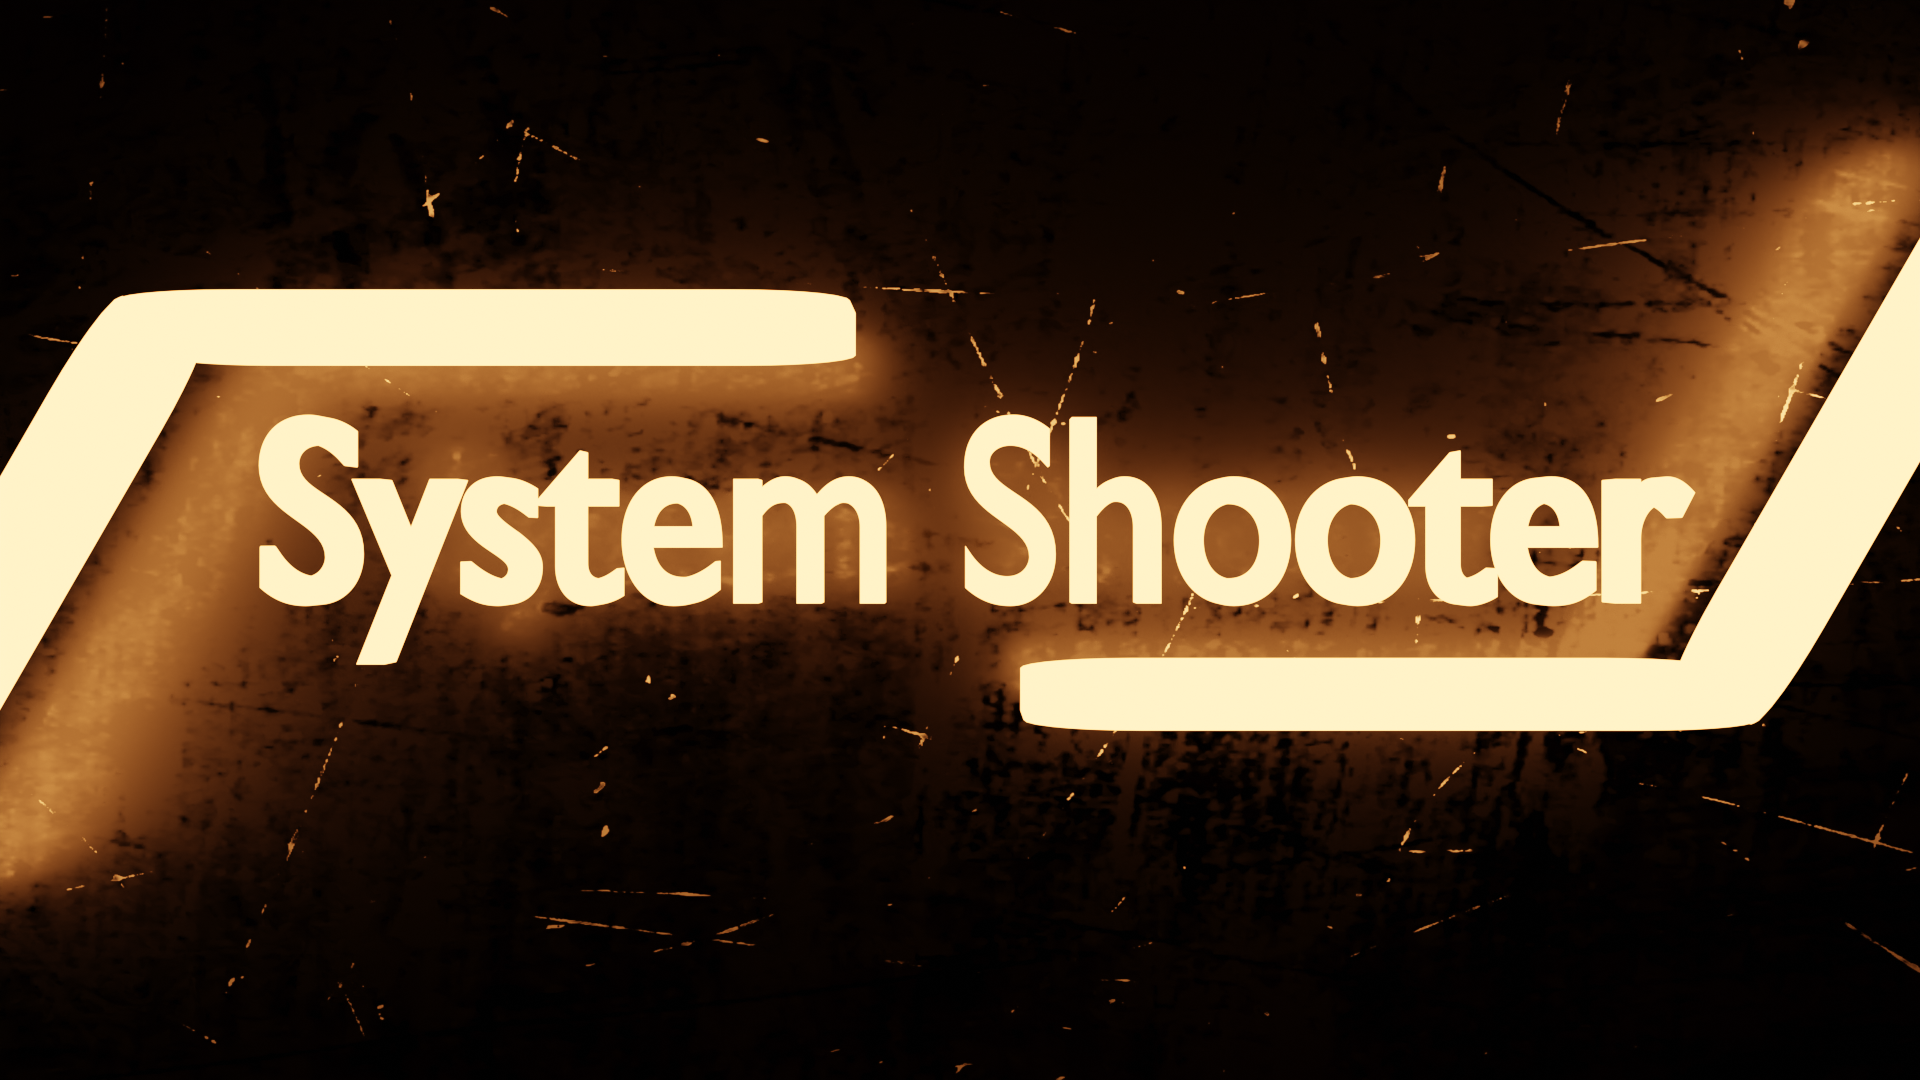 System Shooter